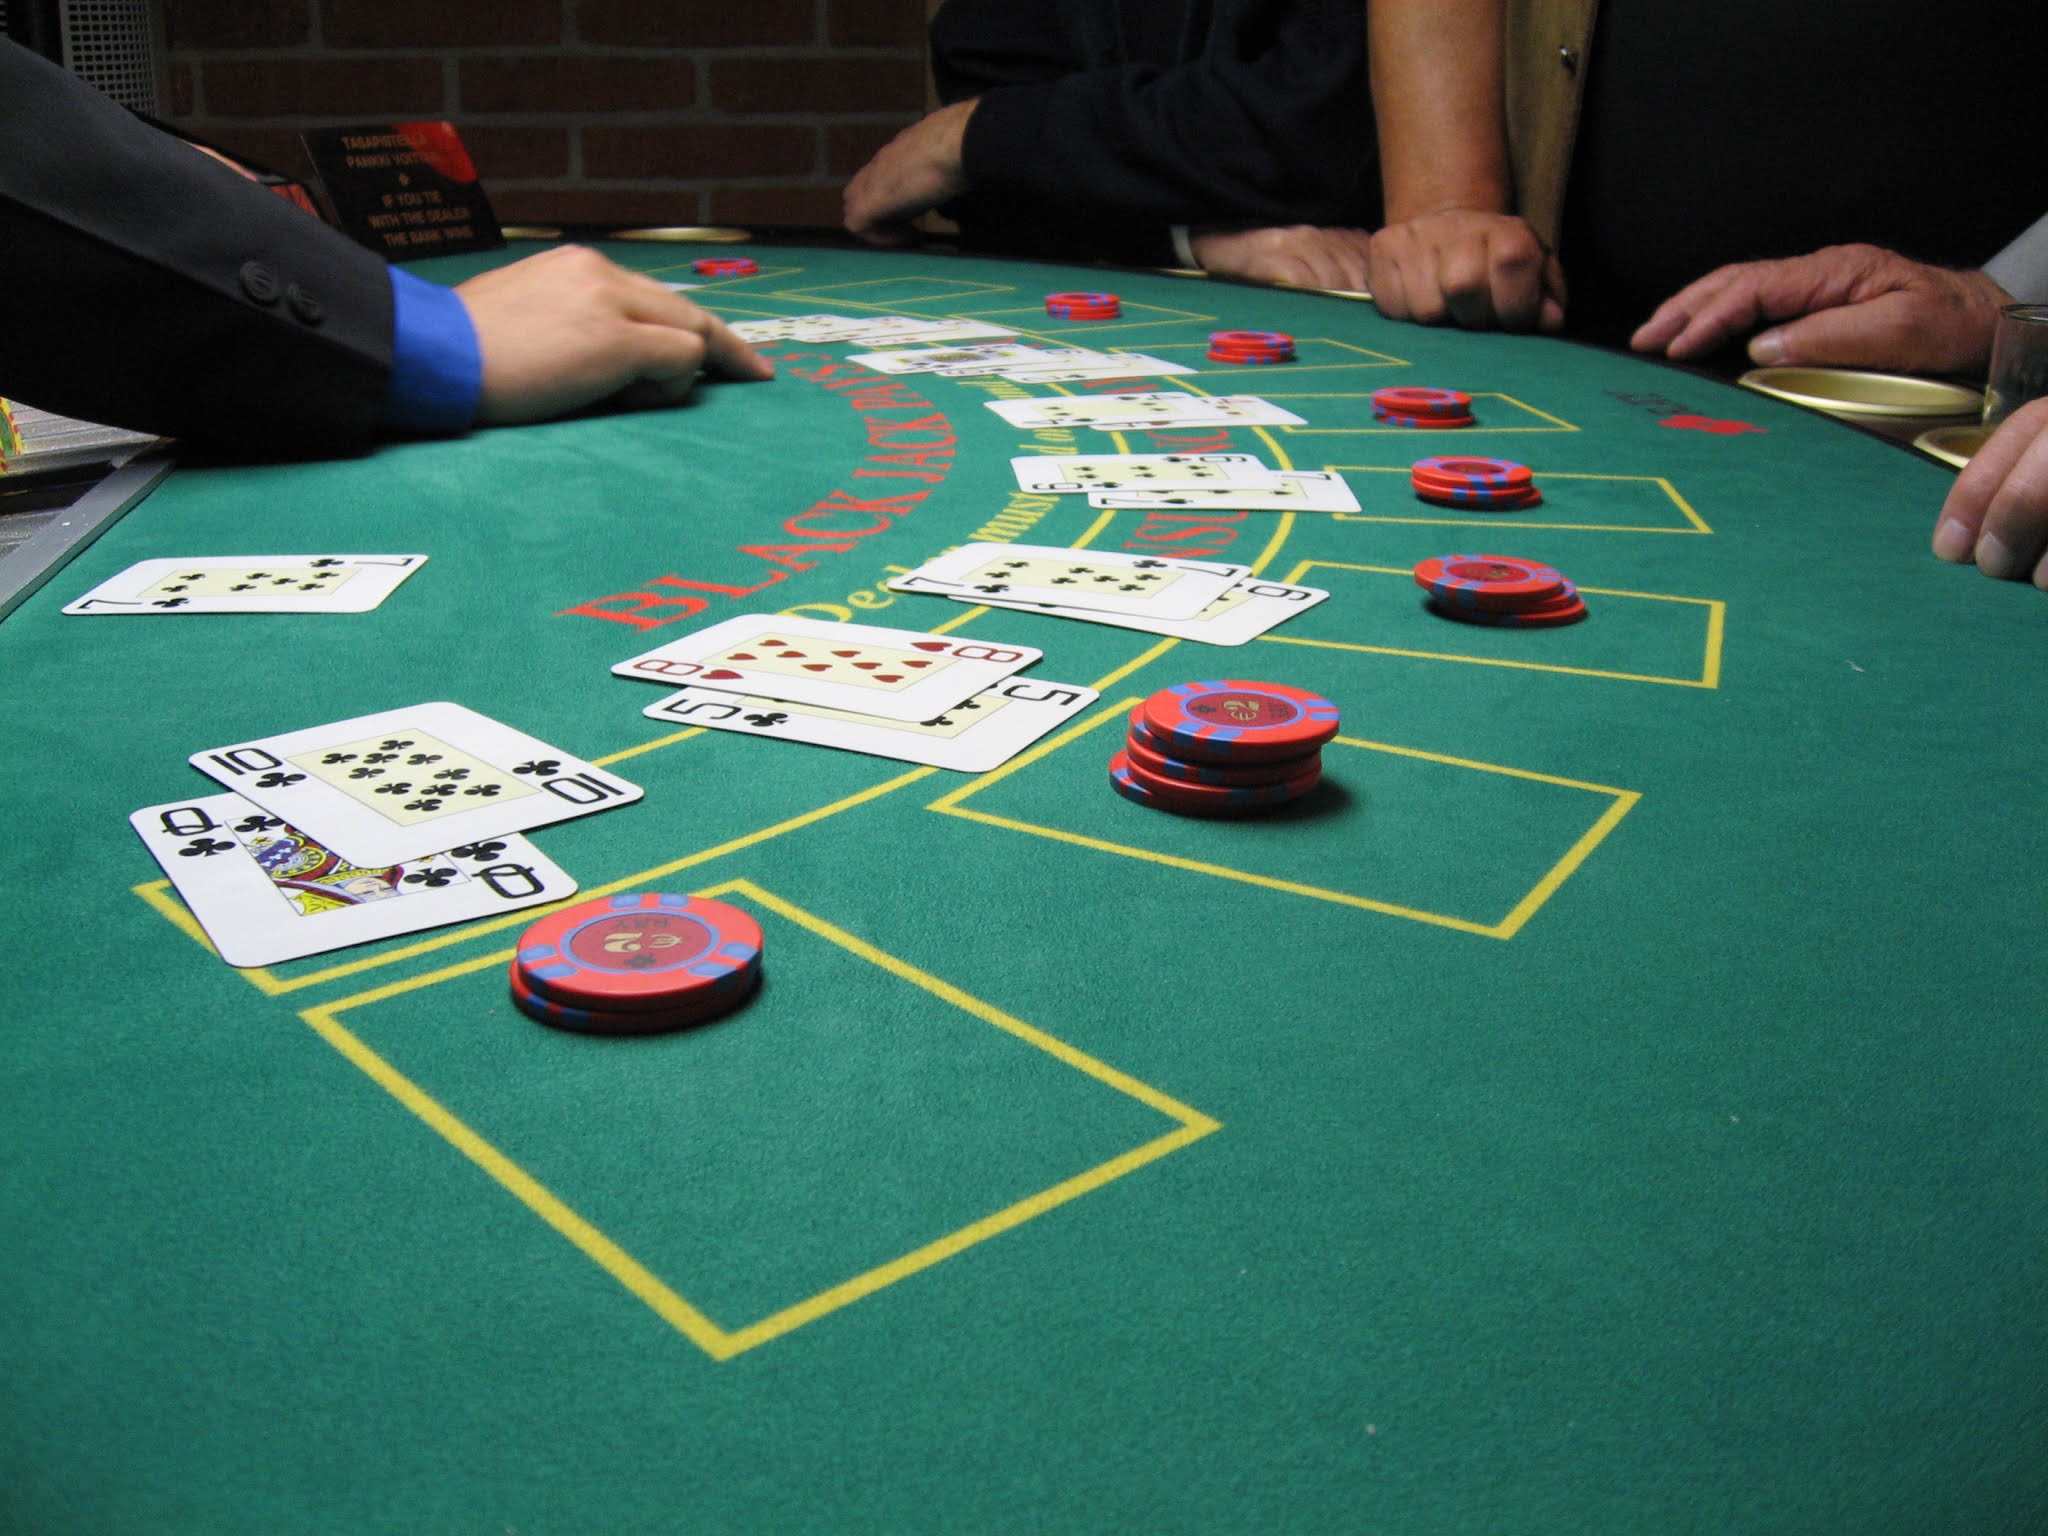 Learn To Play Blackjack, In Addition To The Principles And Methods For Winning At The Card Game